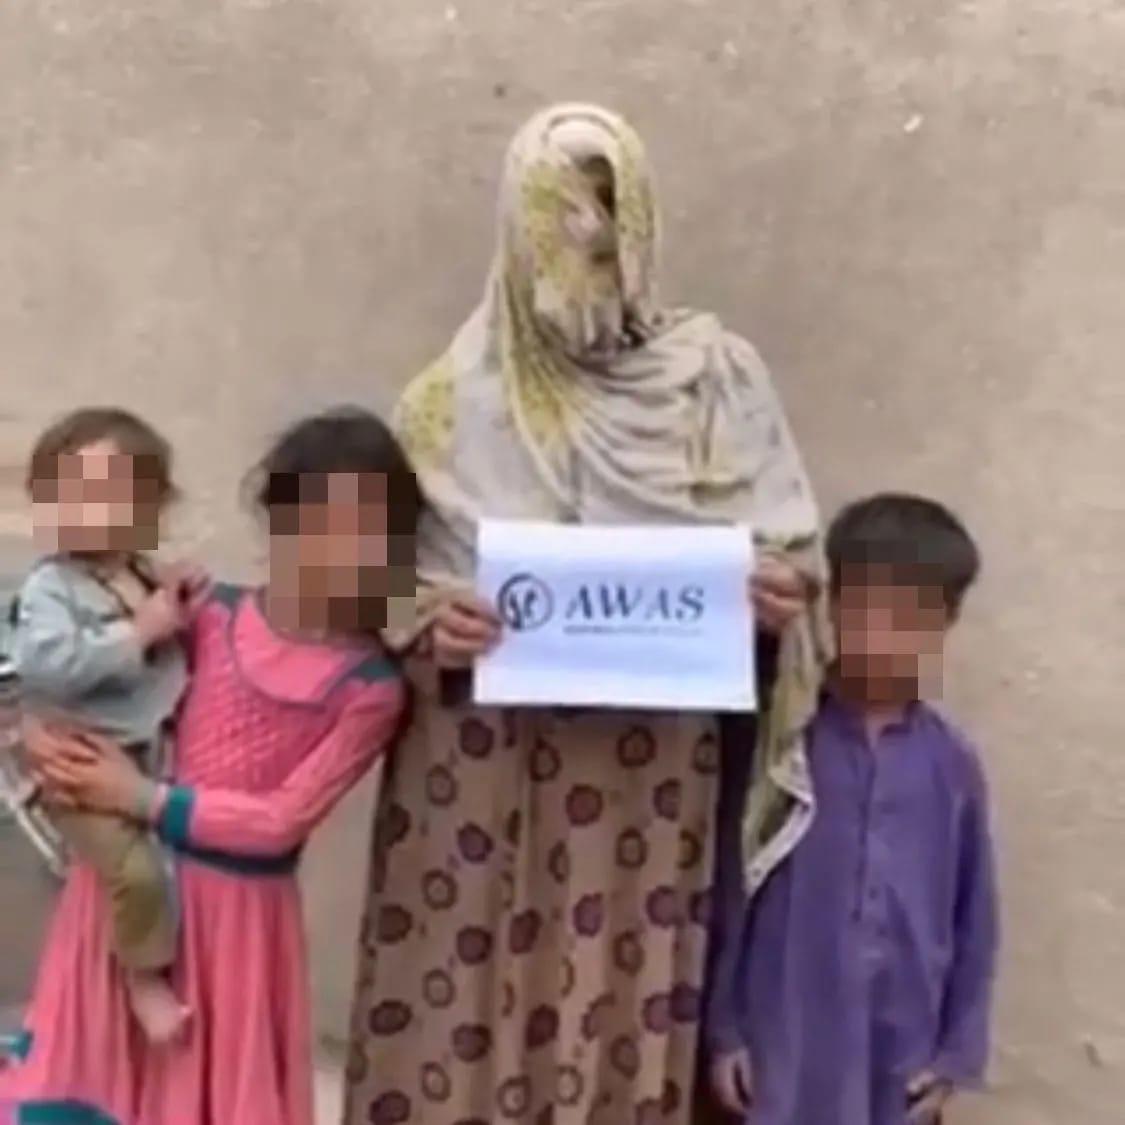 An AWAS beneficiary in Afghanistan poses with her children and the AWAS logo. ©AWAS